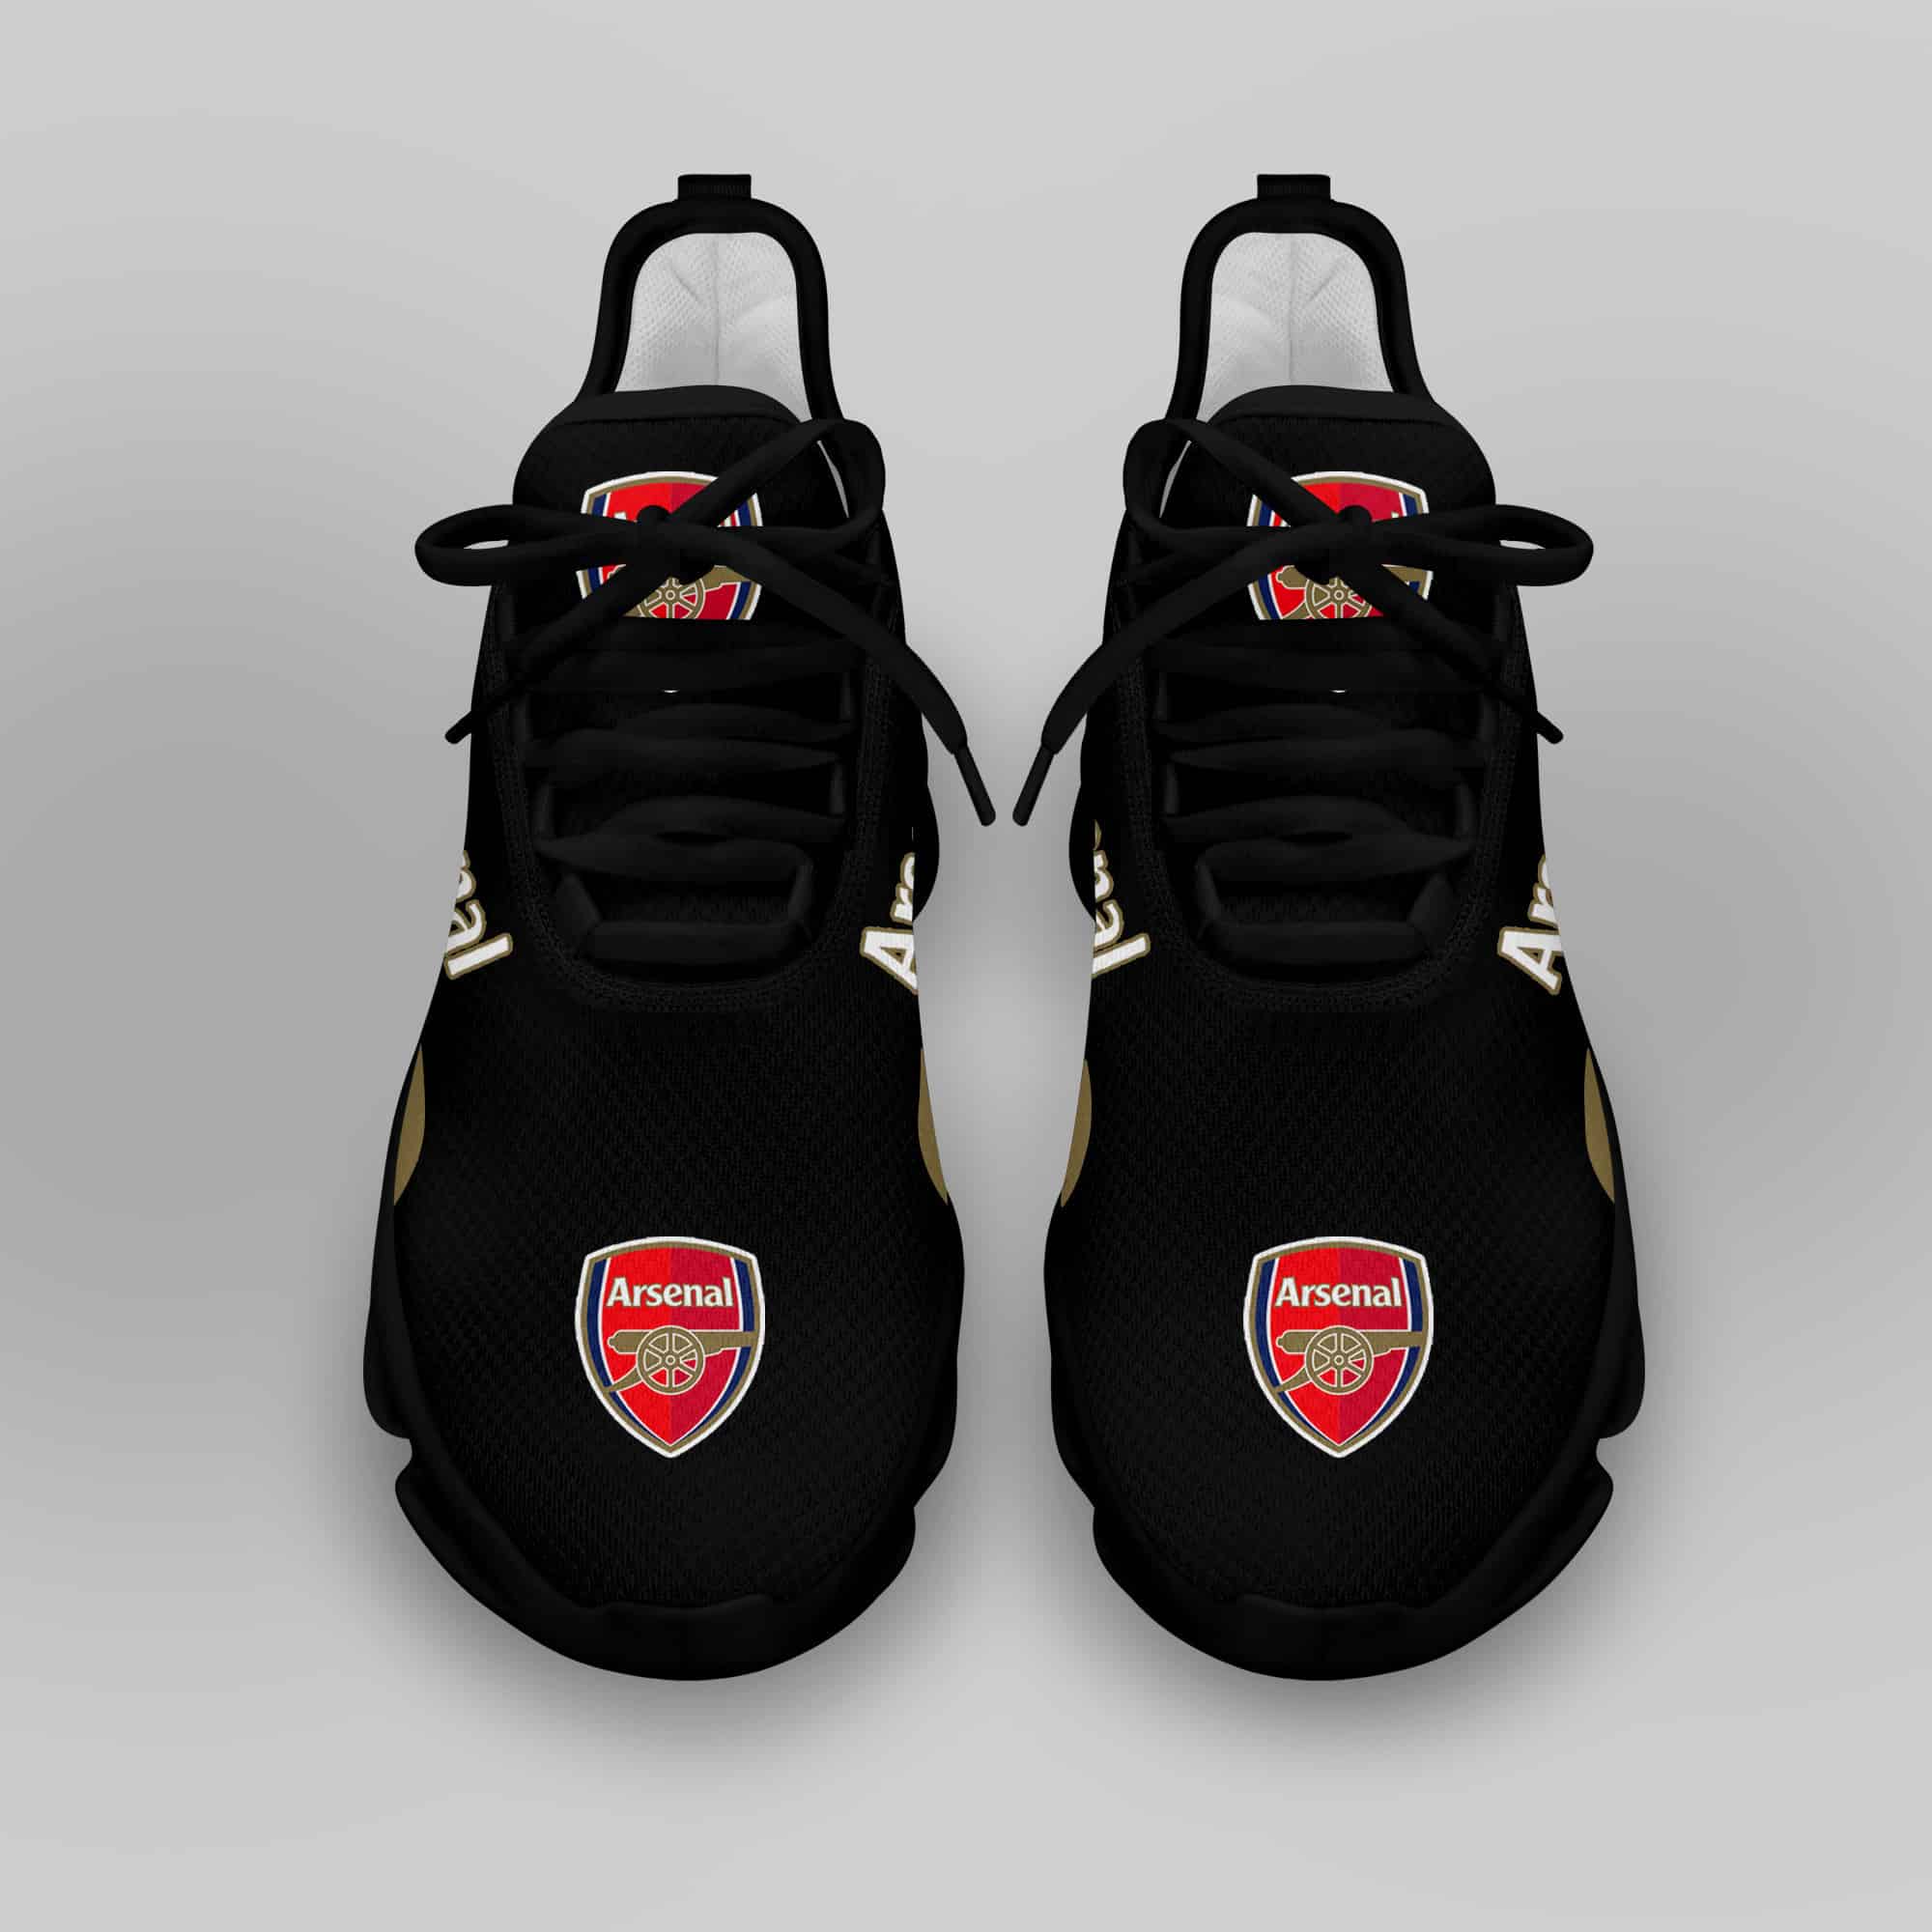 Arsenal Running Shoes Max Soul Shoes Sneakers Ver 3 4